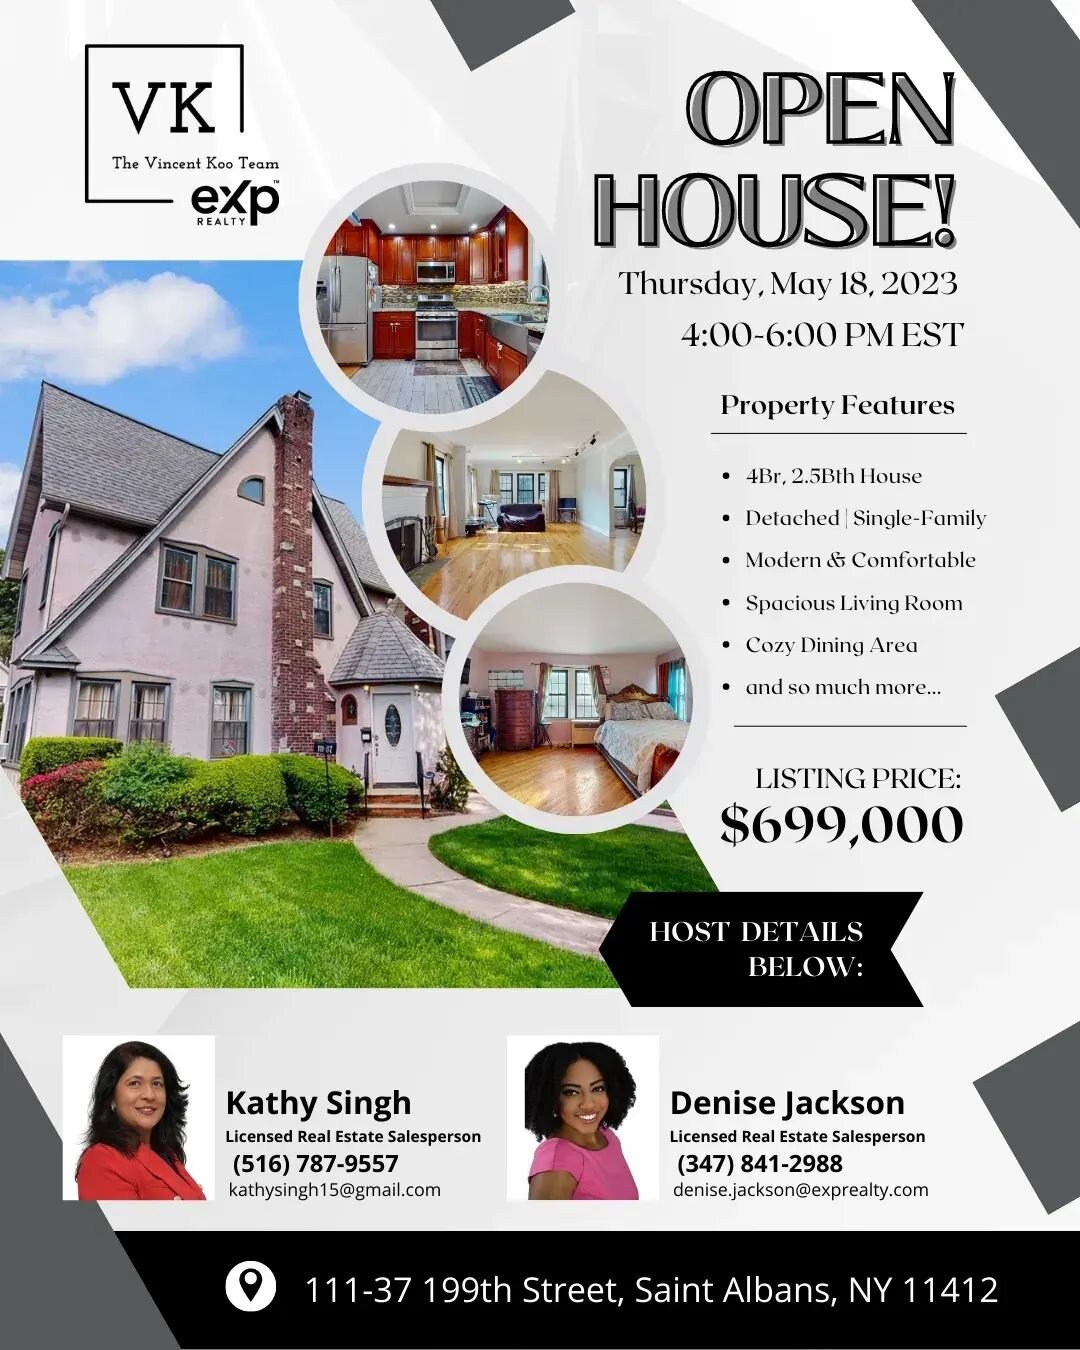 We are excited to invite you to our highly anticipated open house event! Today, May 18, 2023, from 4-6PM, we will be showcasing the exceptional property located at 111-37 199th Street, Saint Albans, NY 11412.

Your hosts for the event will be our exp